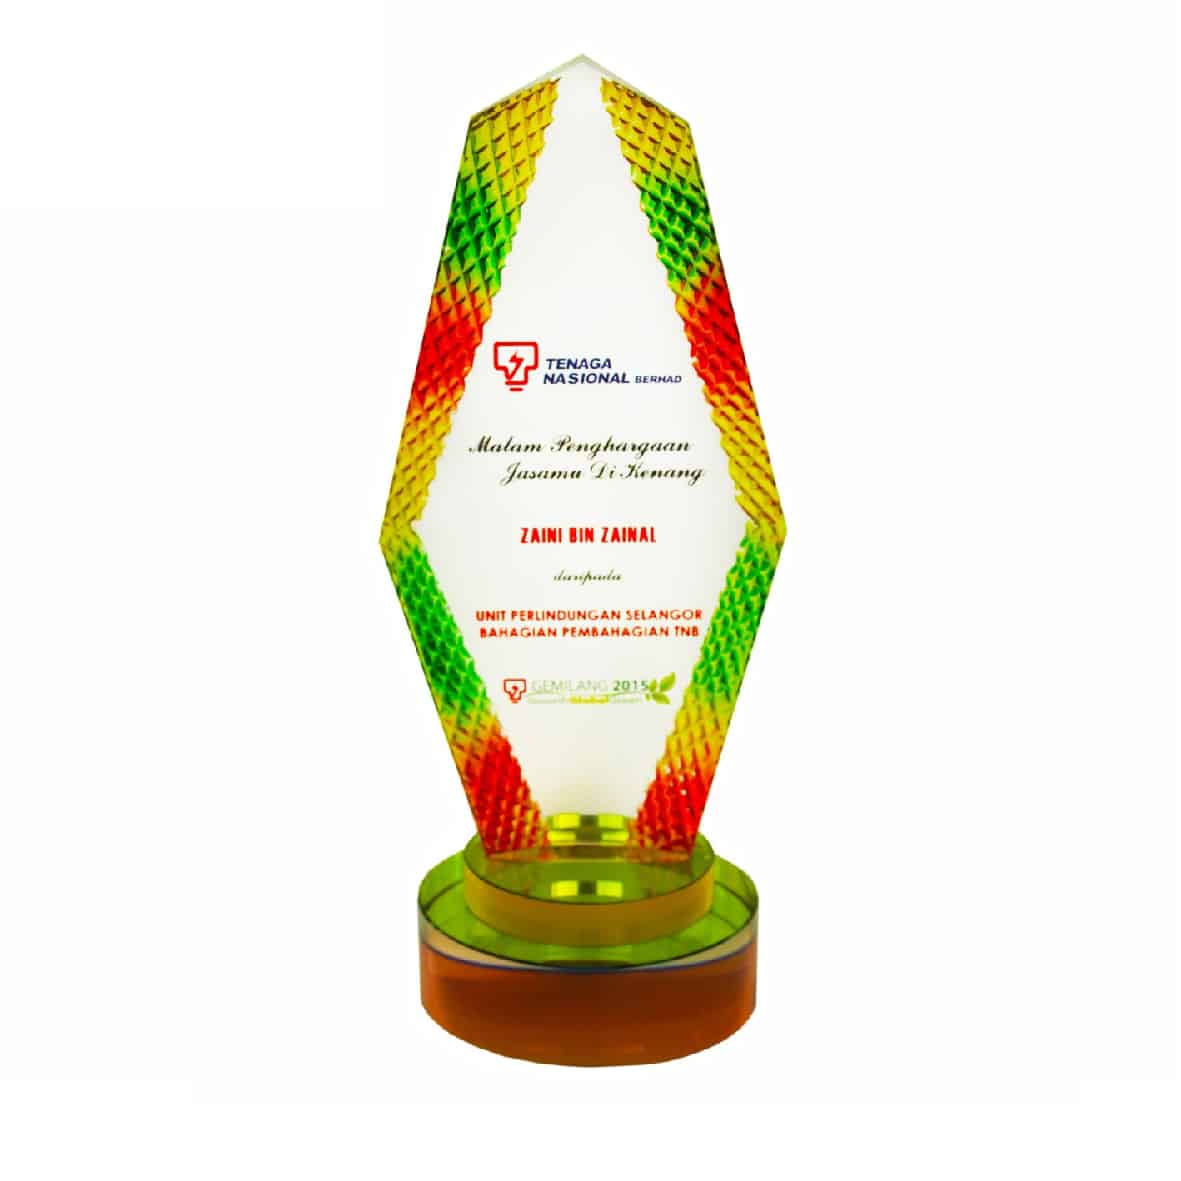 Crystal Plaque at Clazz Trophy Malaysia | #1 Rated Trophy Supplier in Malaysia